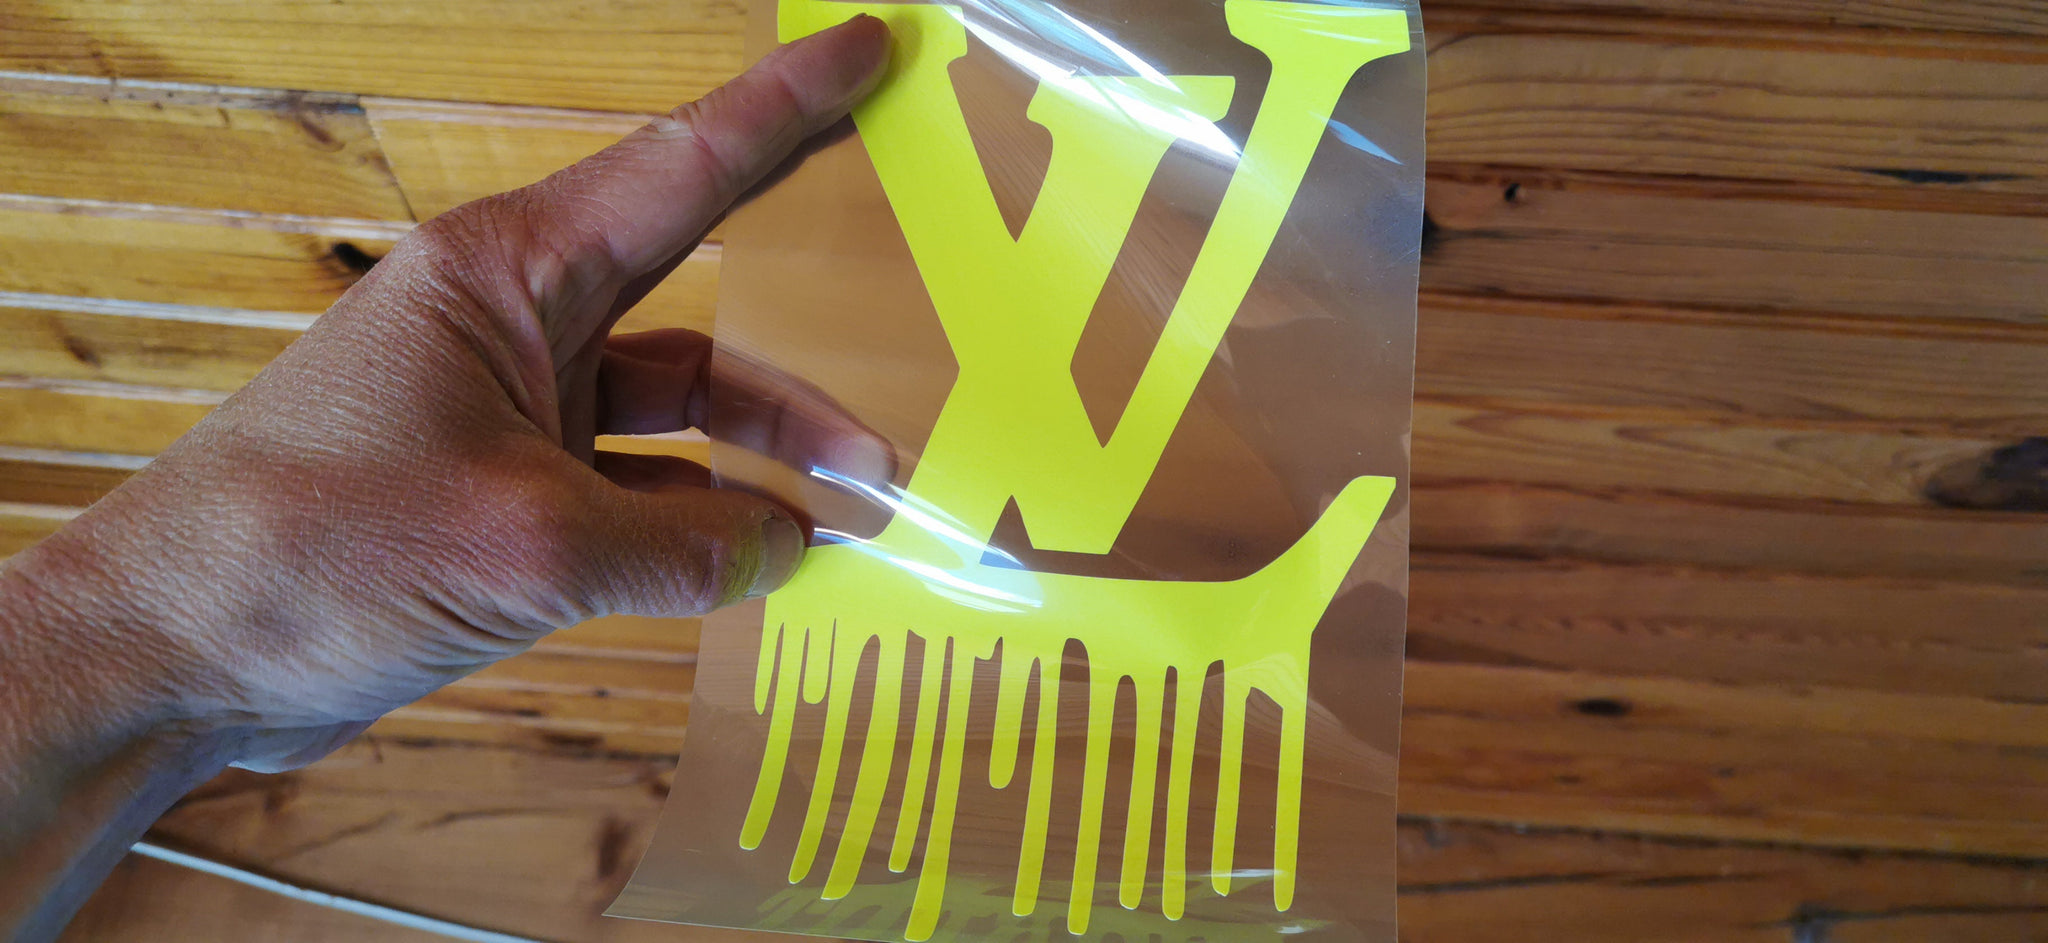 Louis Vuitton Brand Iron-on Patches and Stickers Finish Vinyl